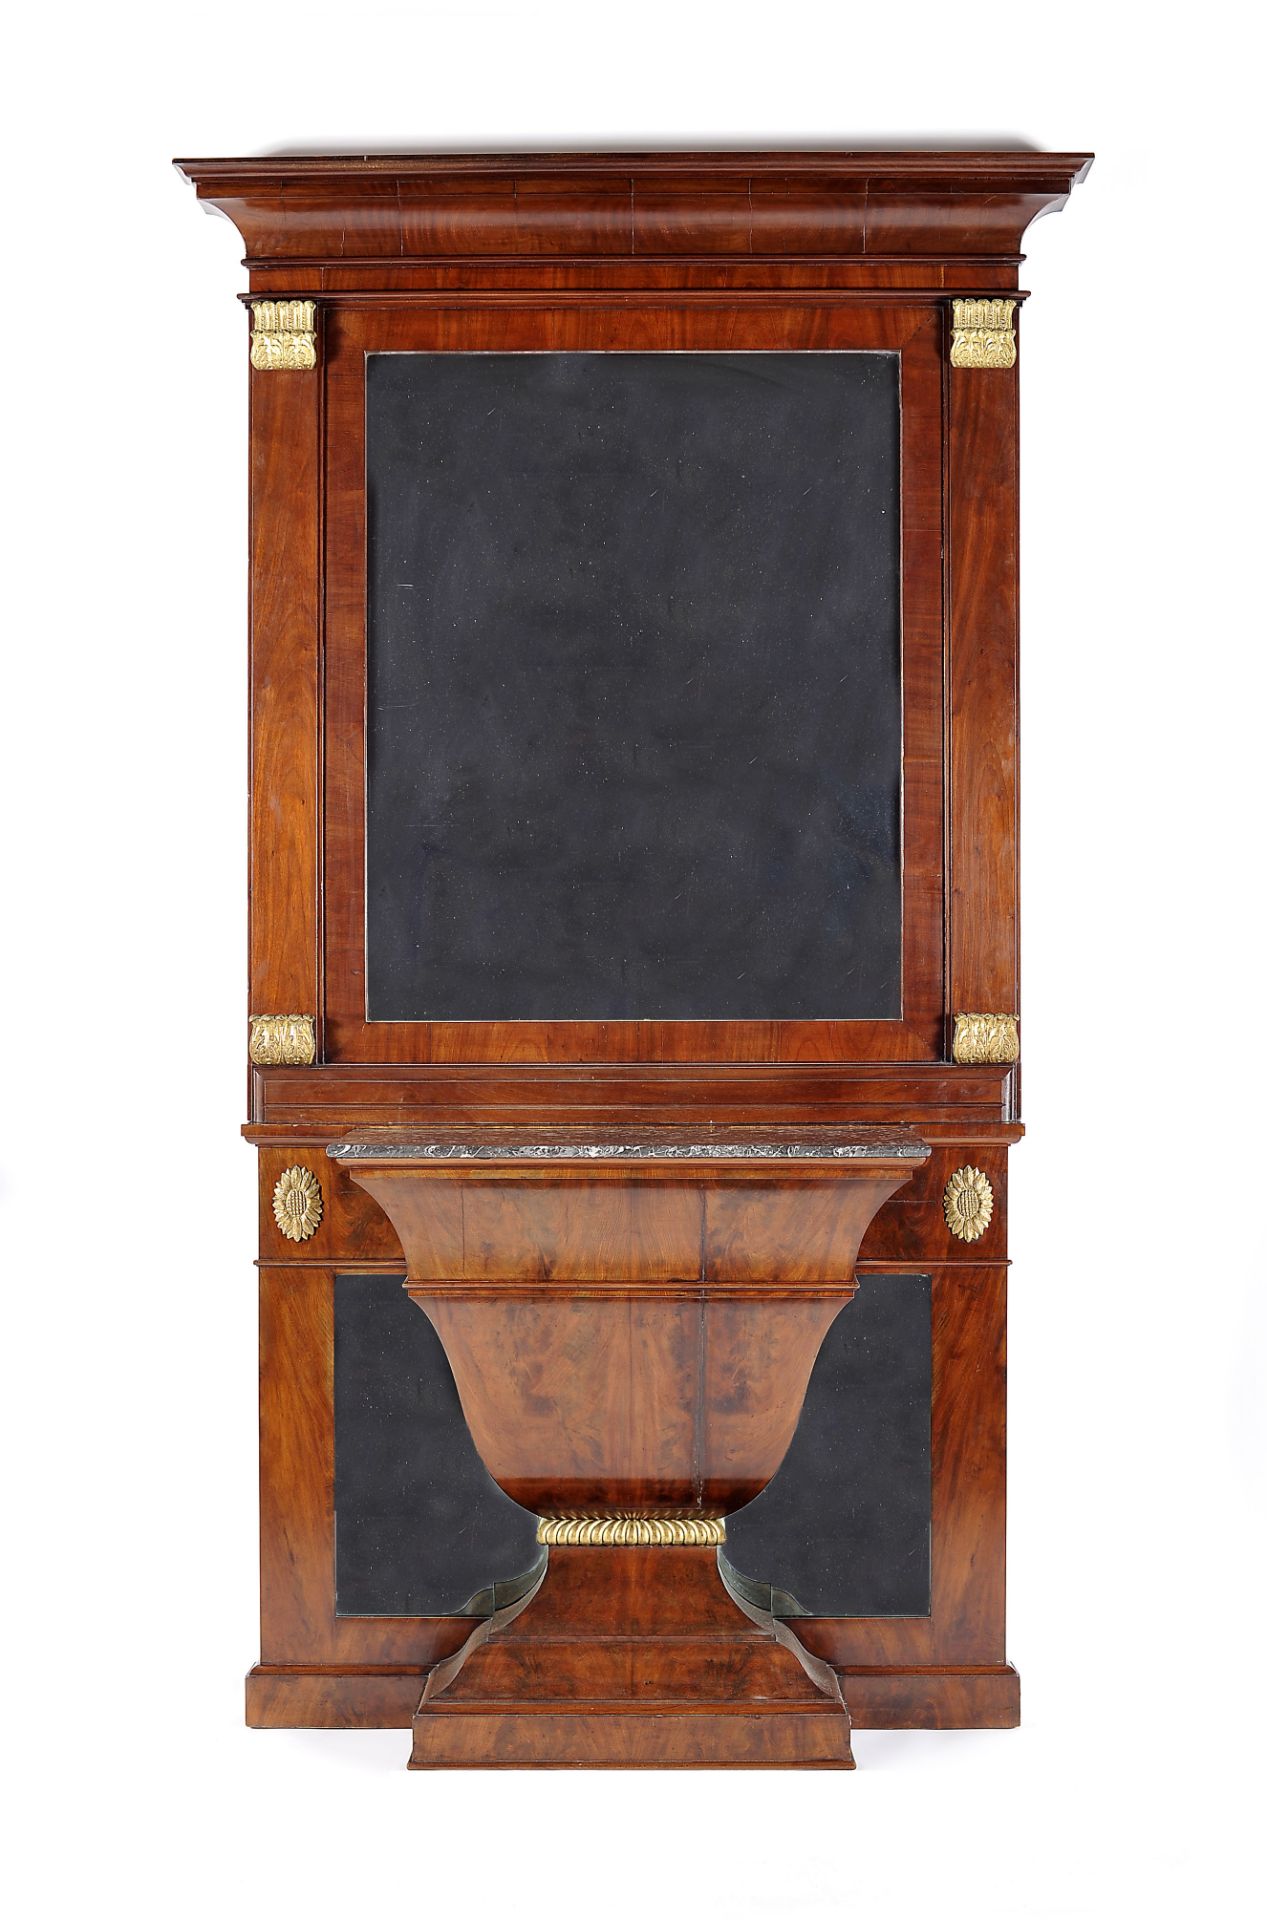 A pier glass with urn-shaped console